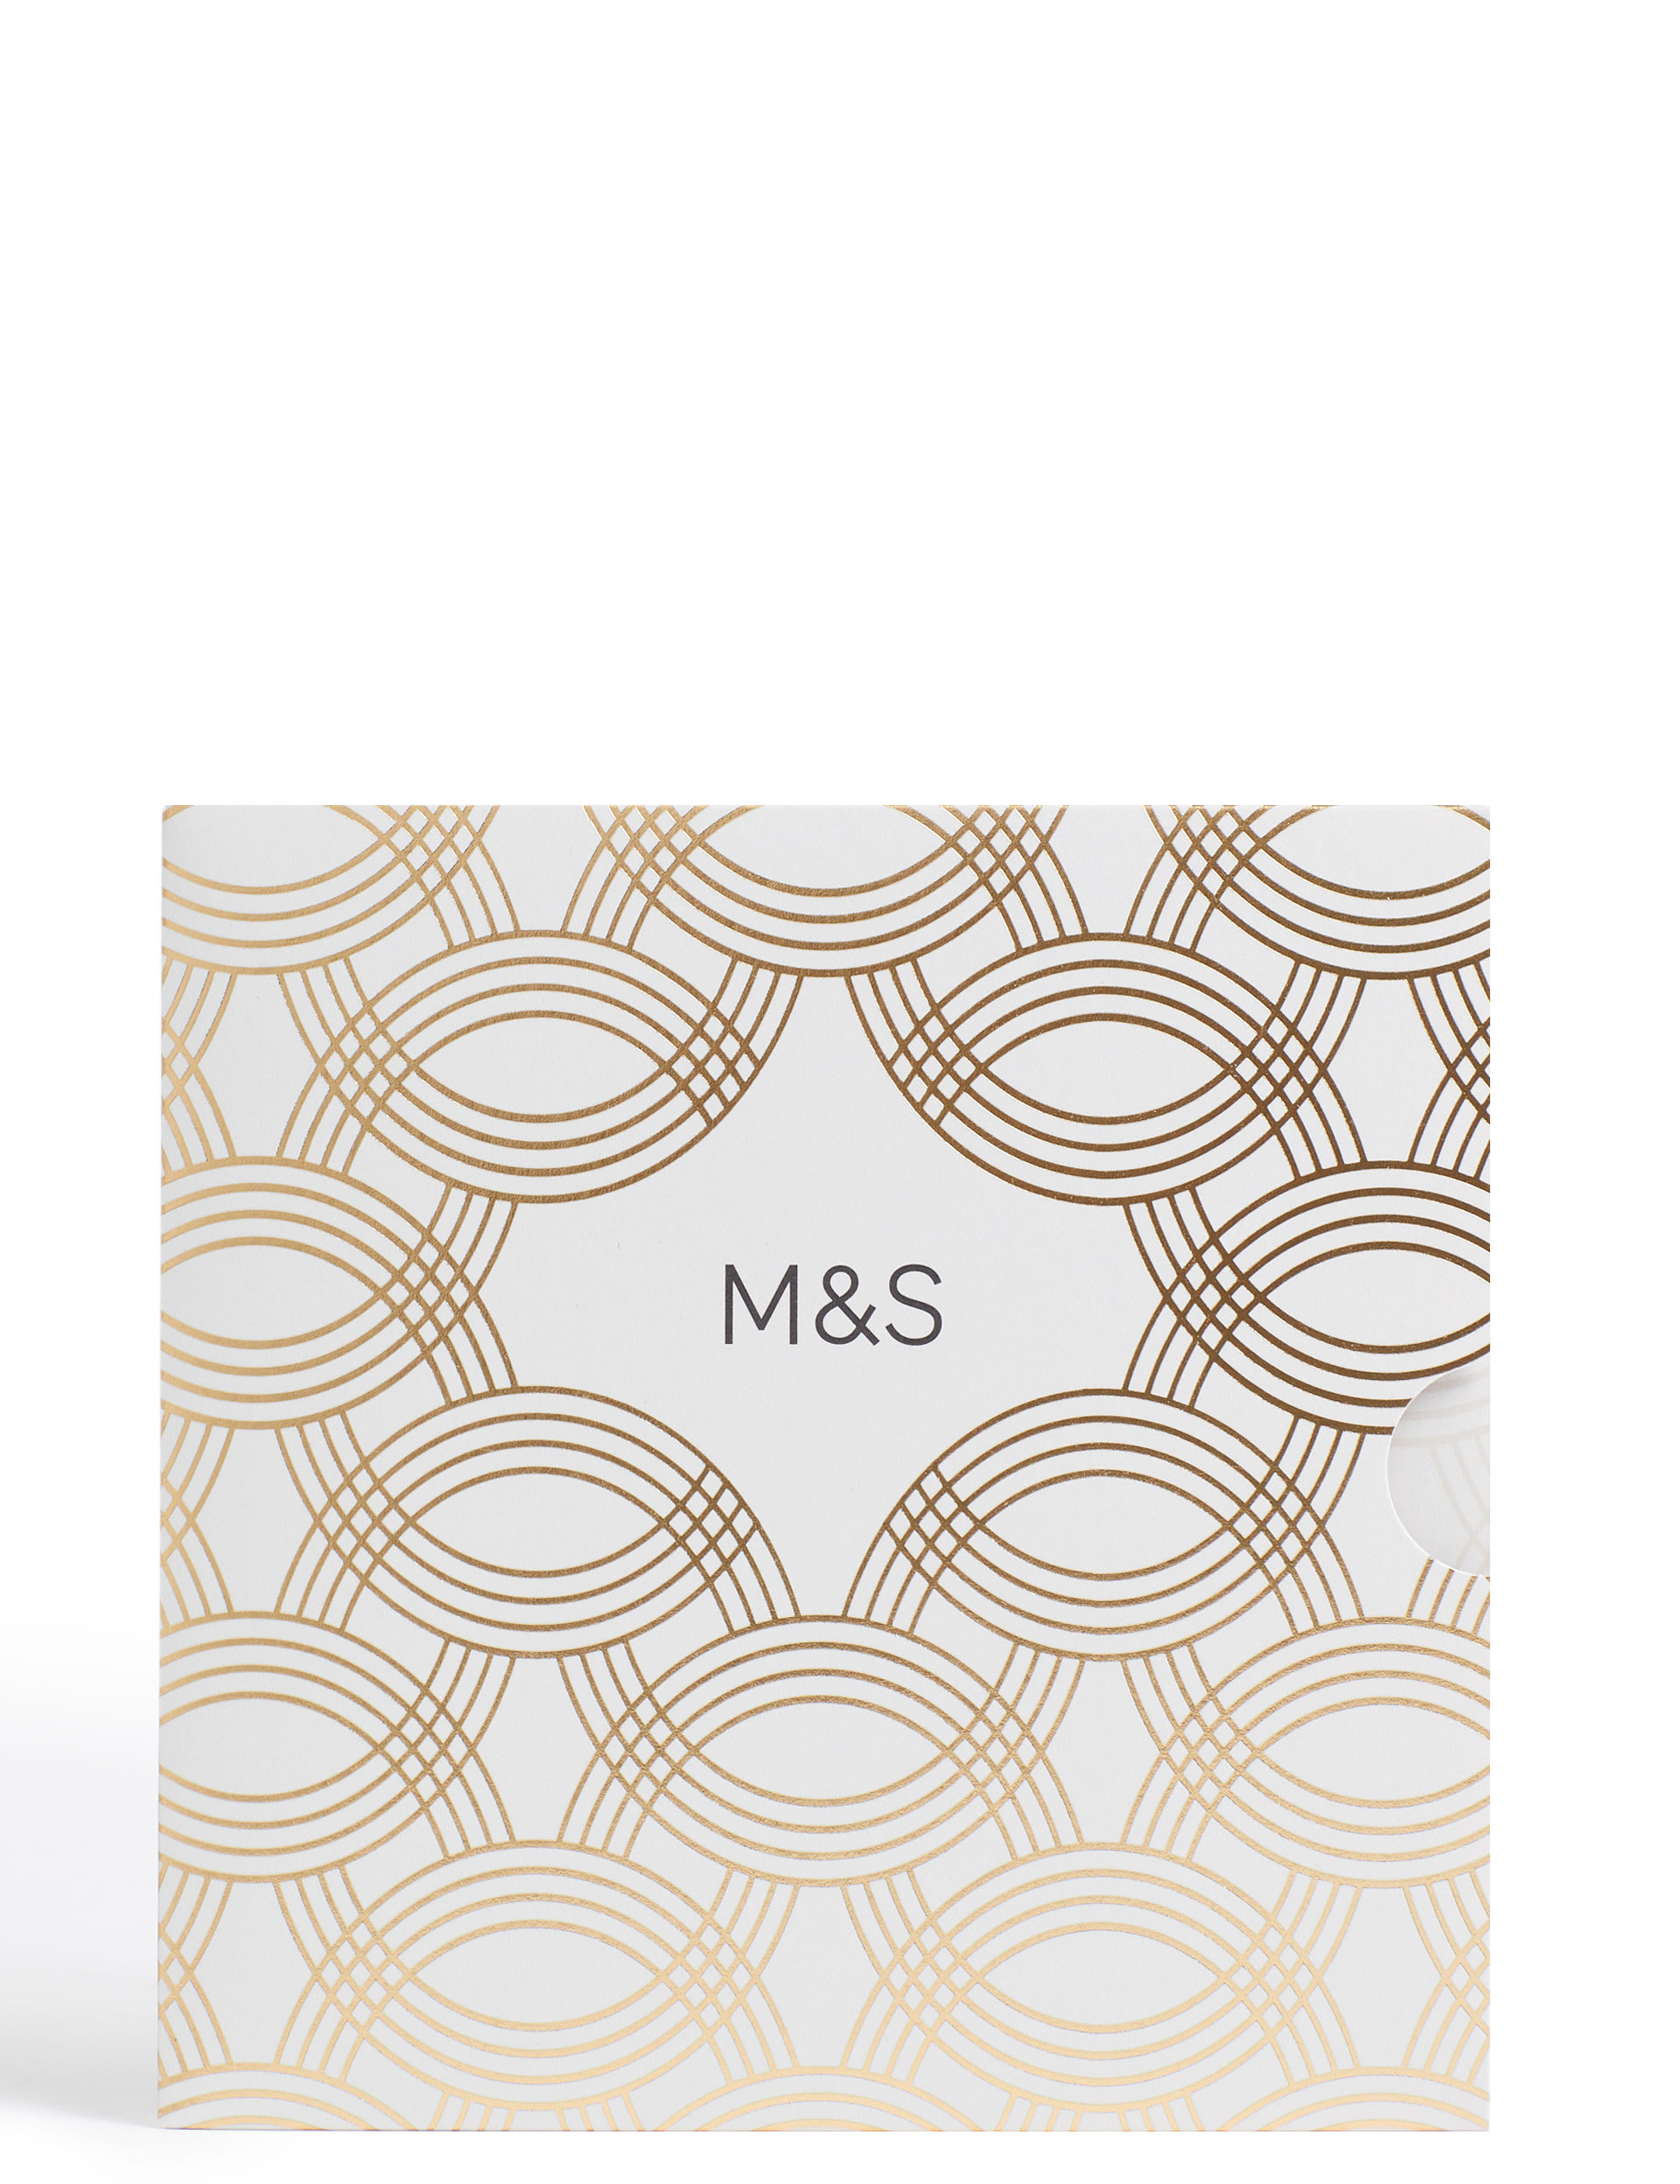 Wavy Pattern Gift Card 1 of 4